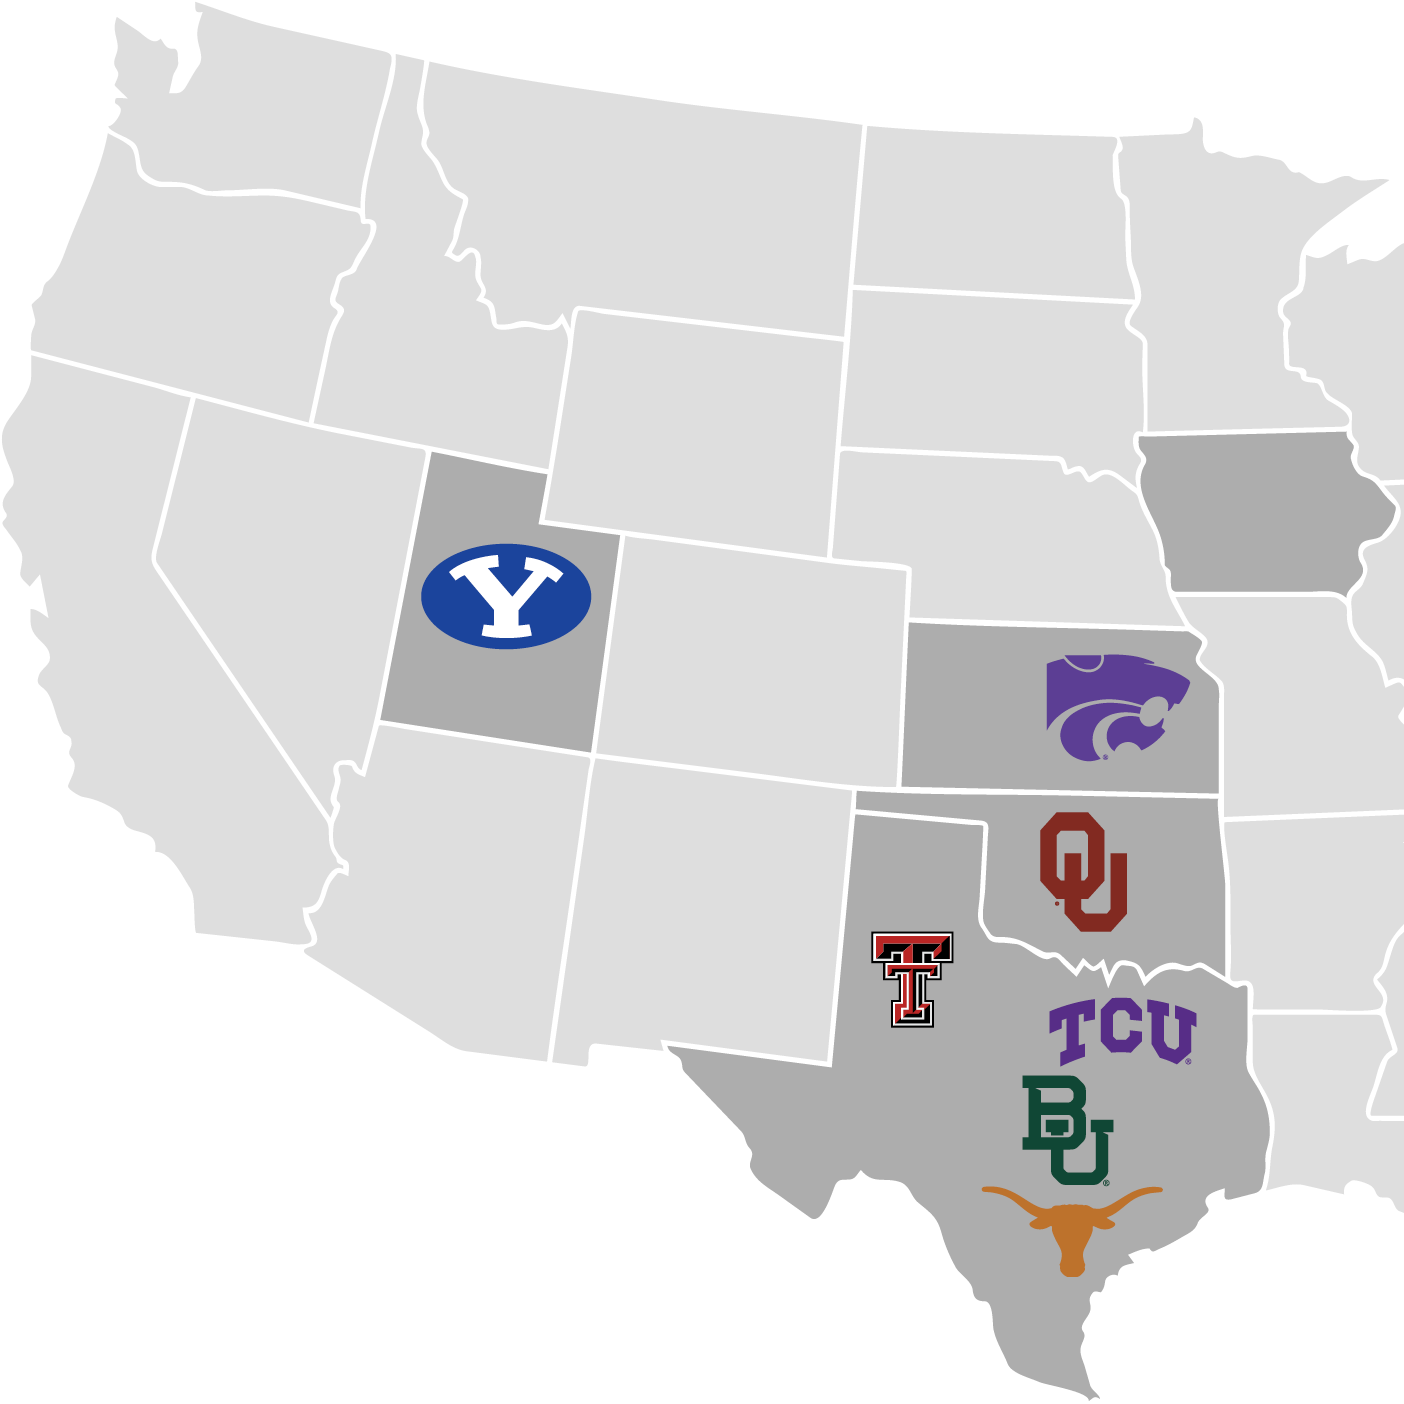 A map of the US with logos for schools from the Big 12